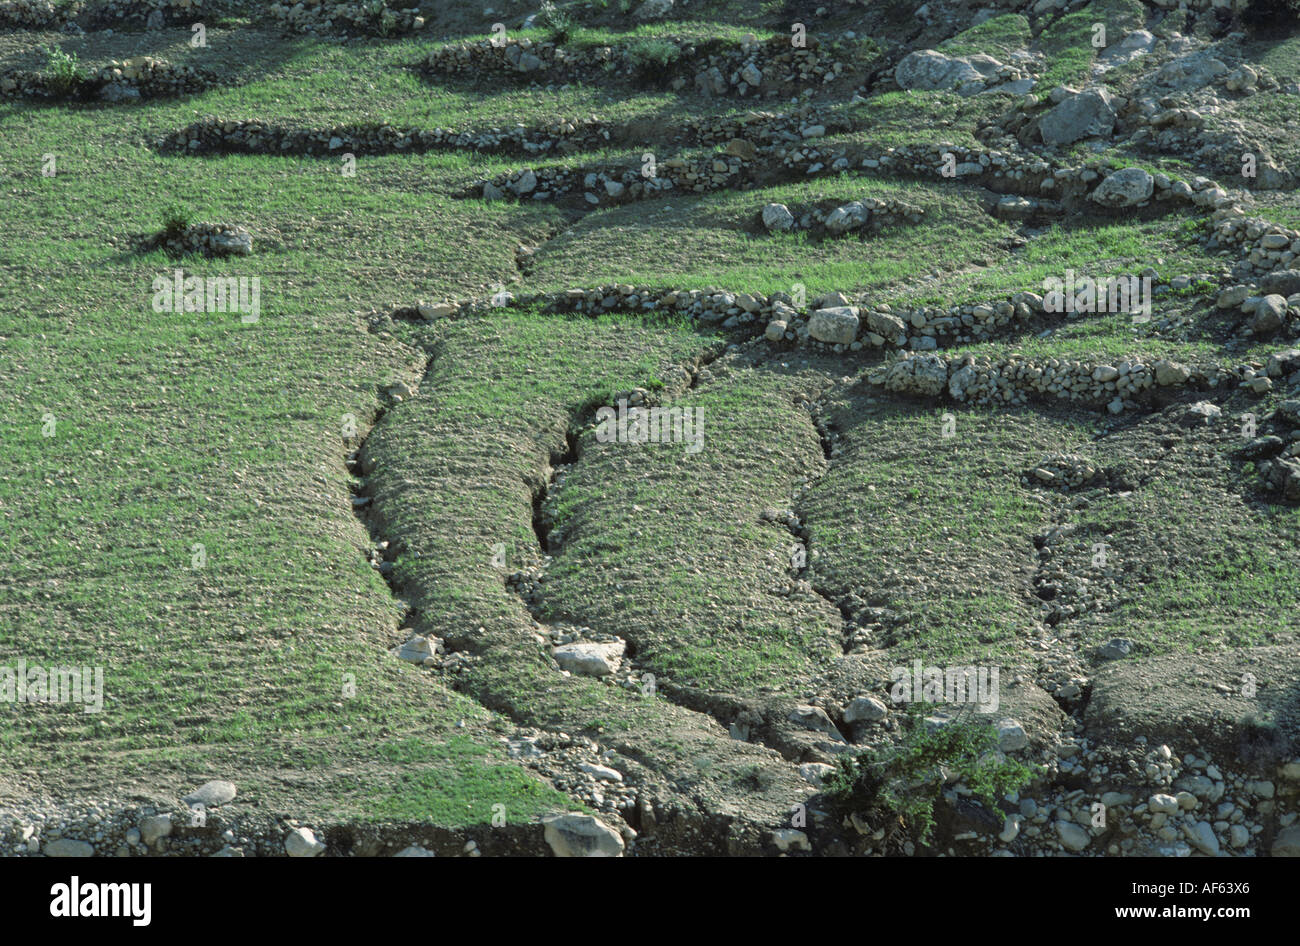 Young cereal crop on steep with gullies cut by rill erosion Morocco Stock Photo